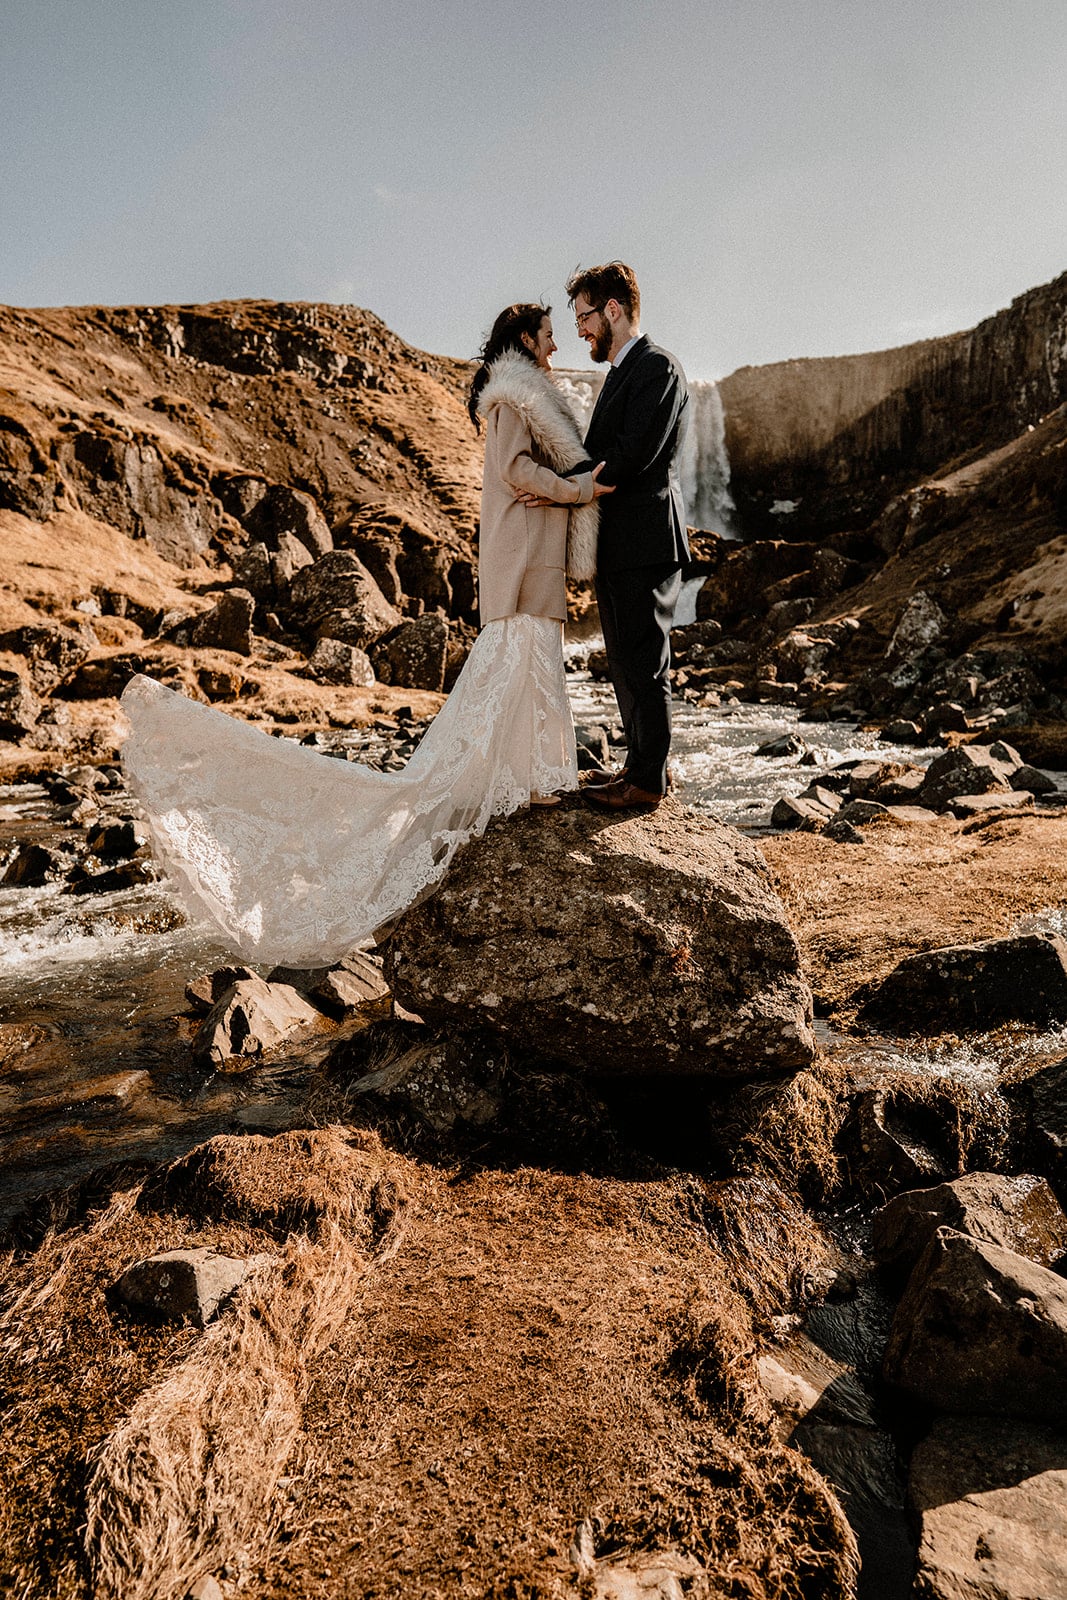 Western Iceland's Tranquility: Bride and Groom's Intimate Bond